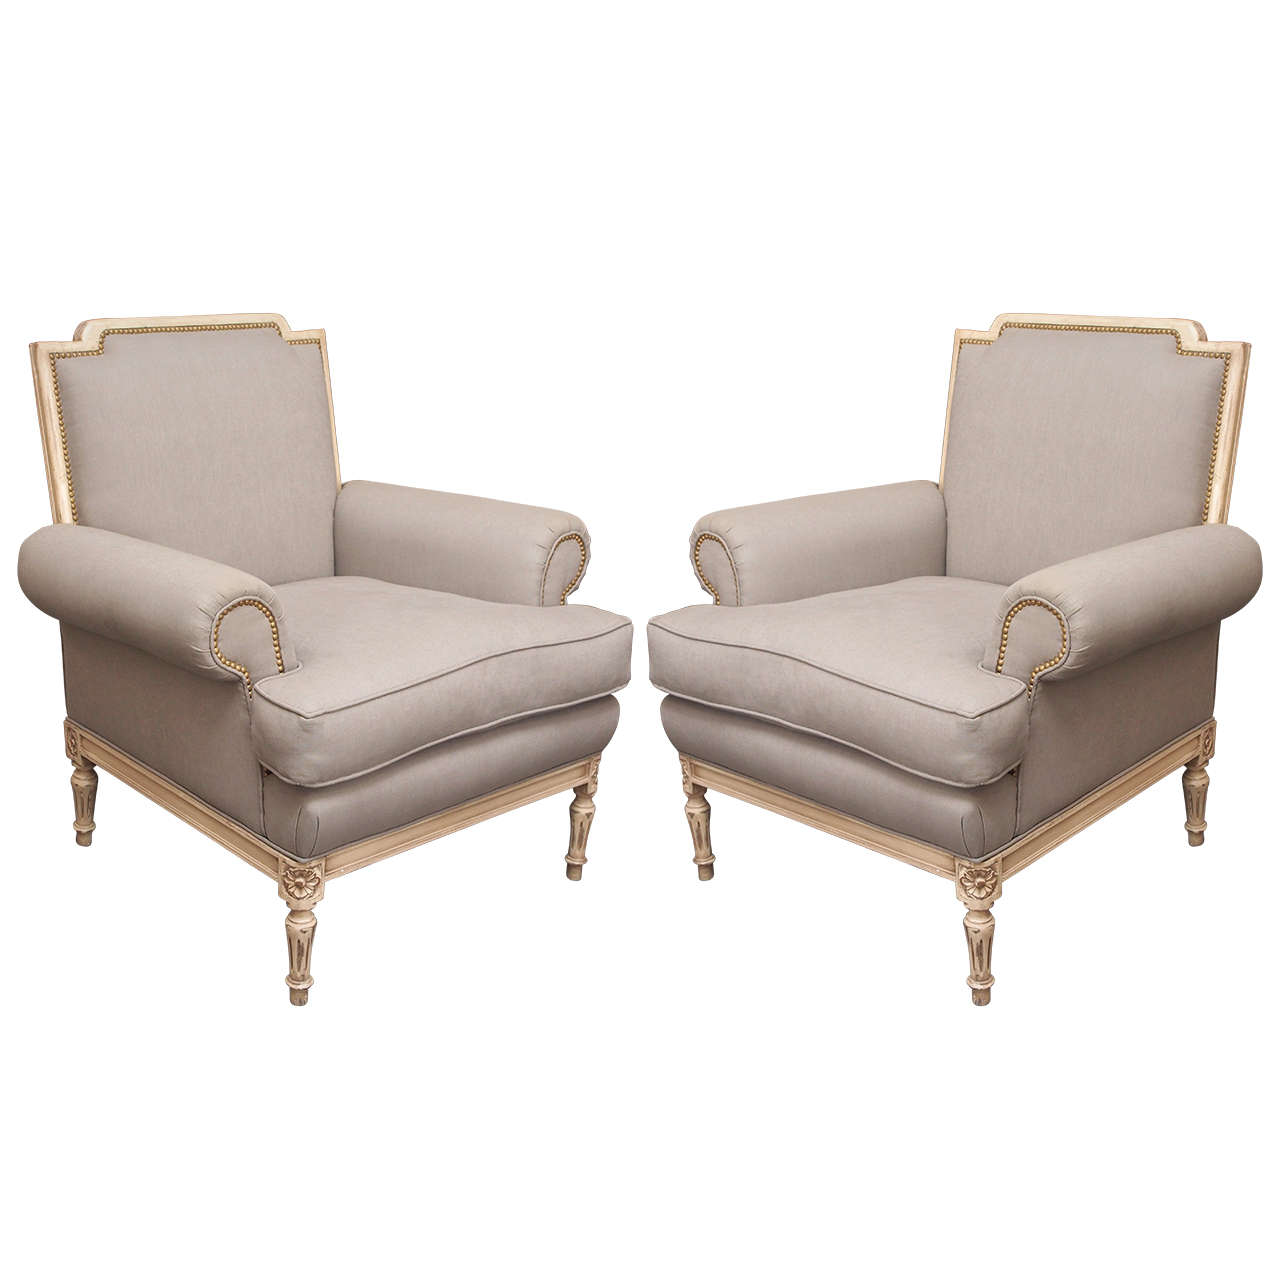 Pair of Mid-Century Modern Painted Wood and Upholstered Armchairs, Buenos Aires For Sale